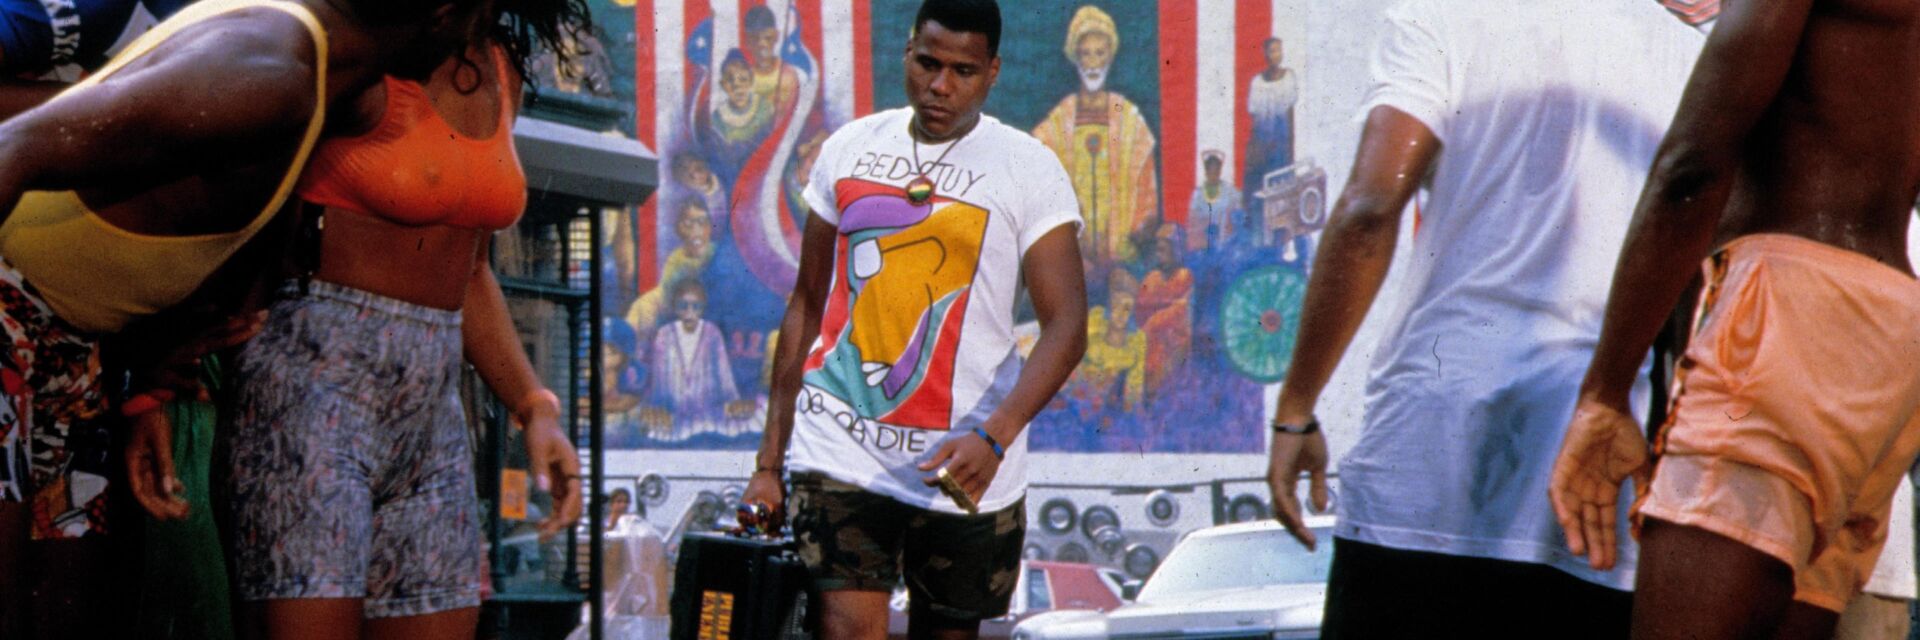 Do The Right Thing (1989)